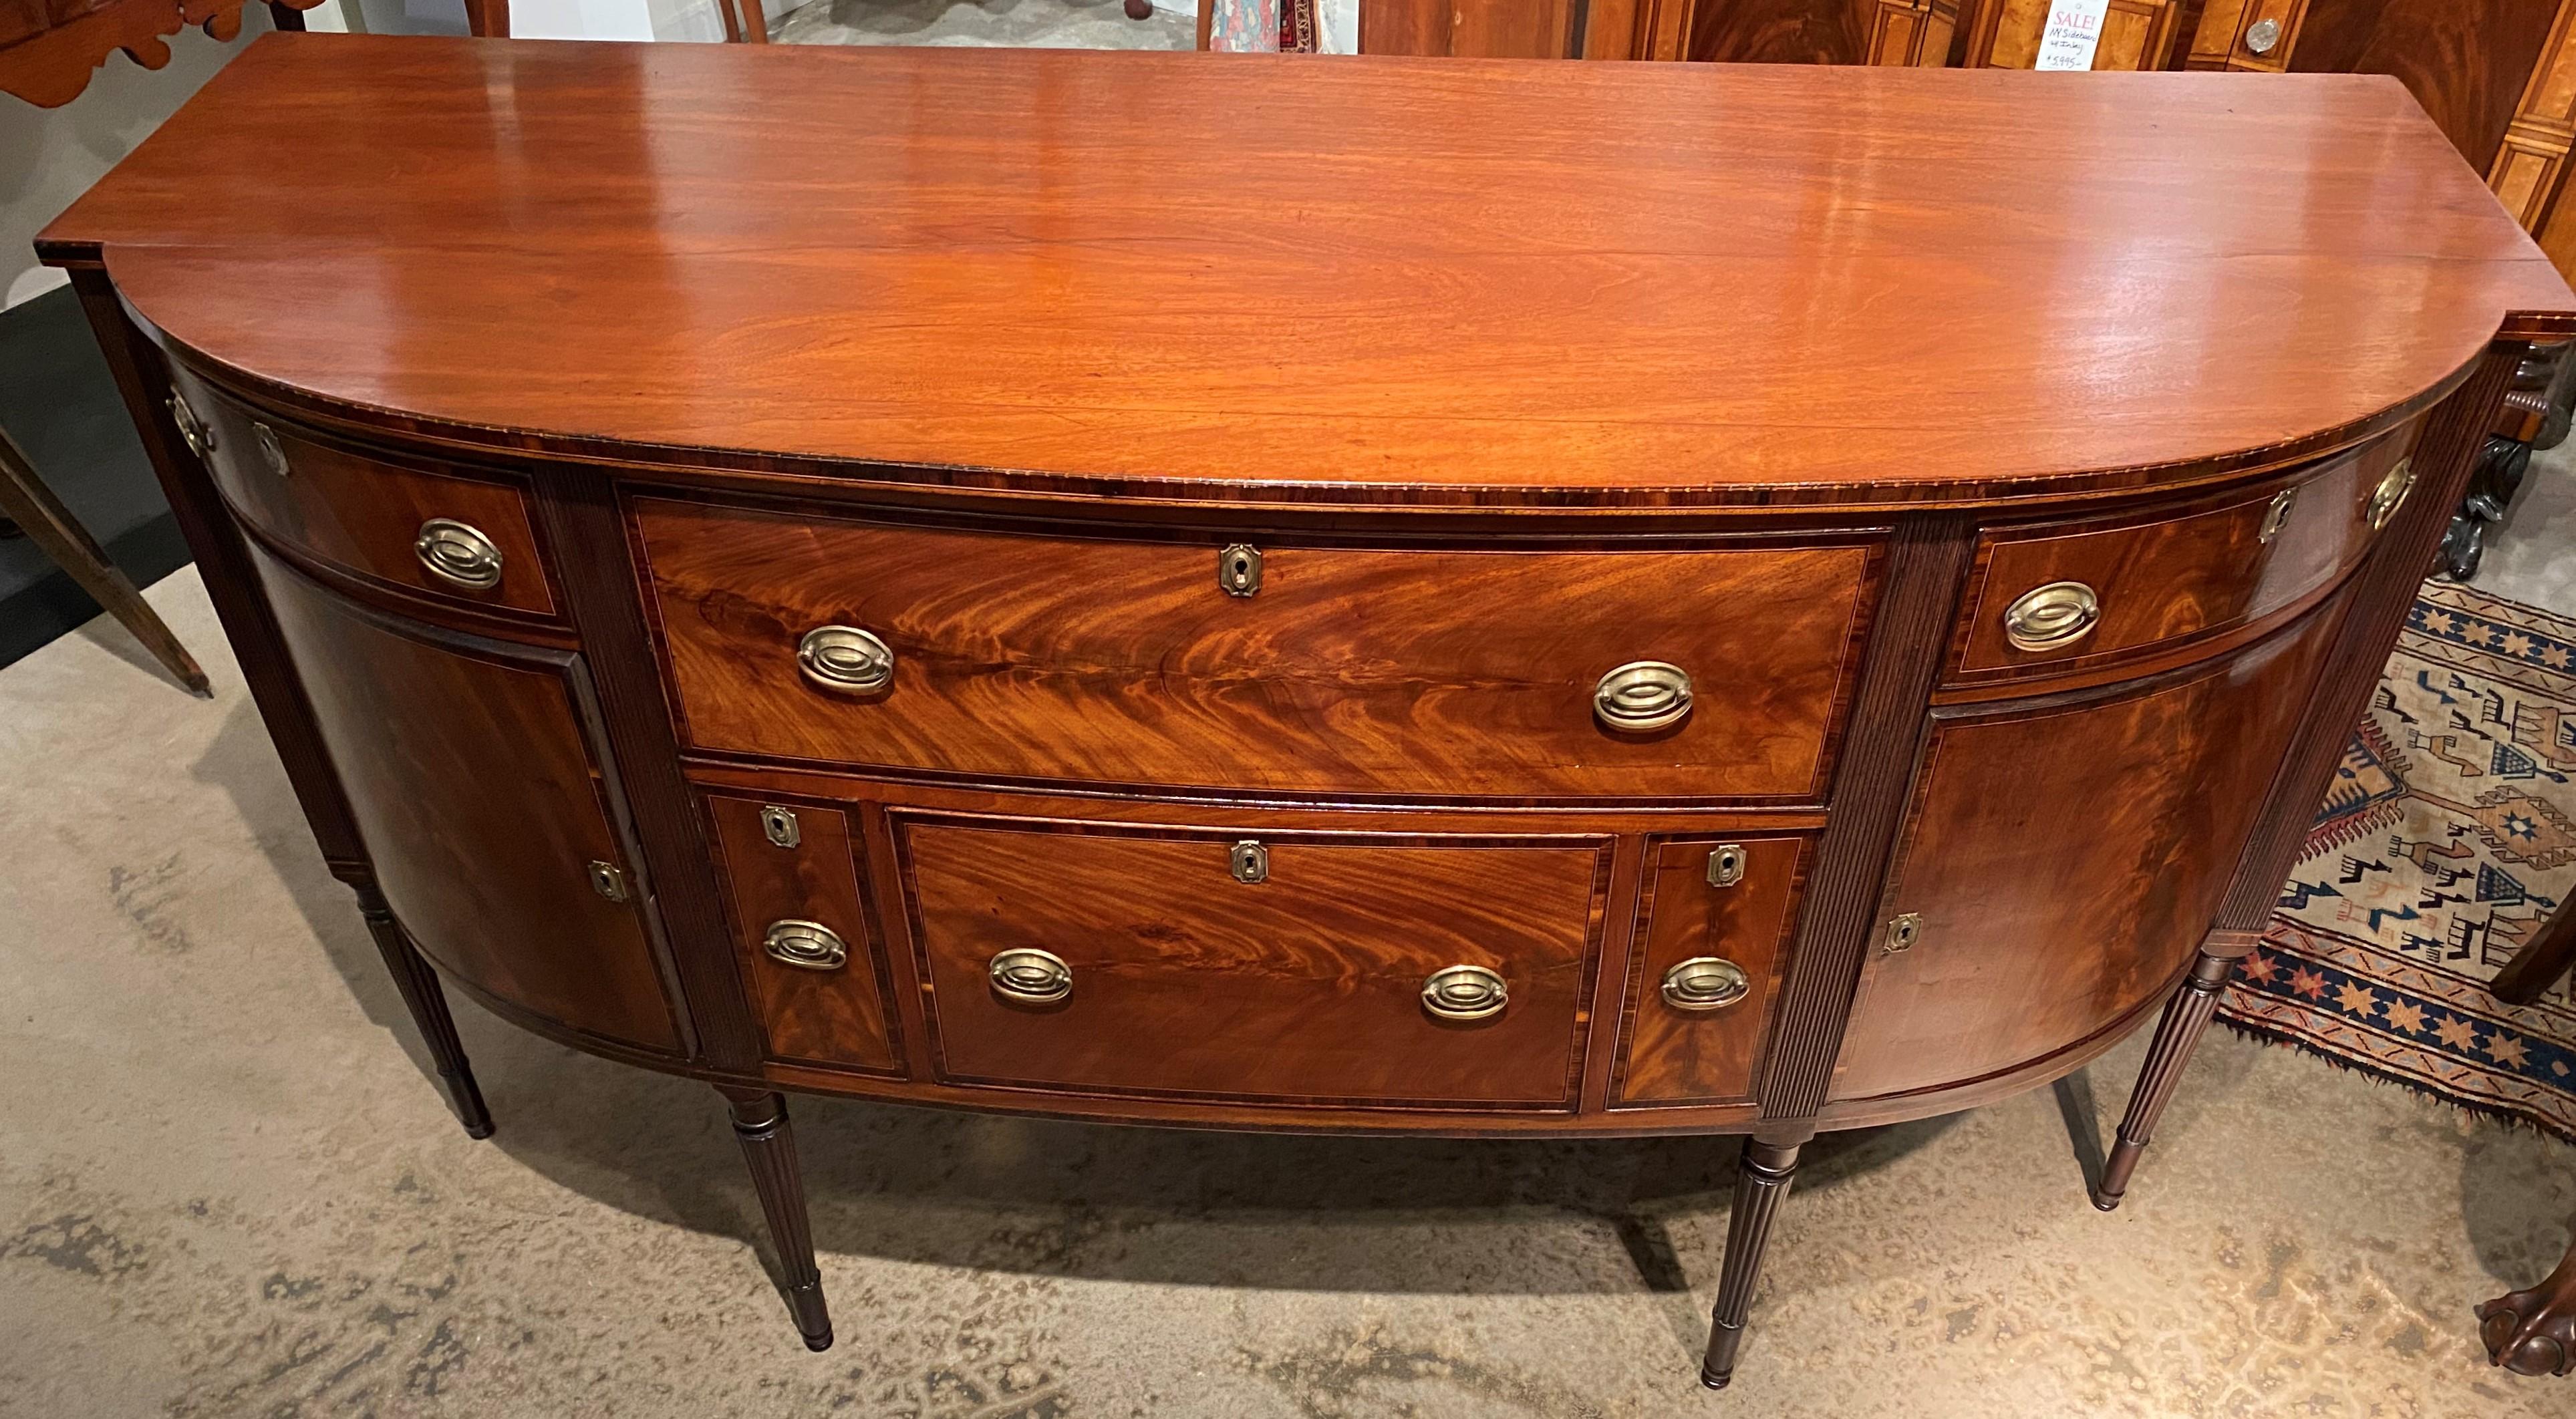 An exceptional Federal Boston demilune Mahogany sideboard, with shaped top with delicate arrow inlay surmounting a conforming case with deep central frieze drawer flanked by smaller fitted felt lined flatware drawers, over a second deep center